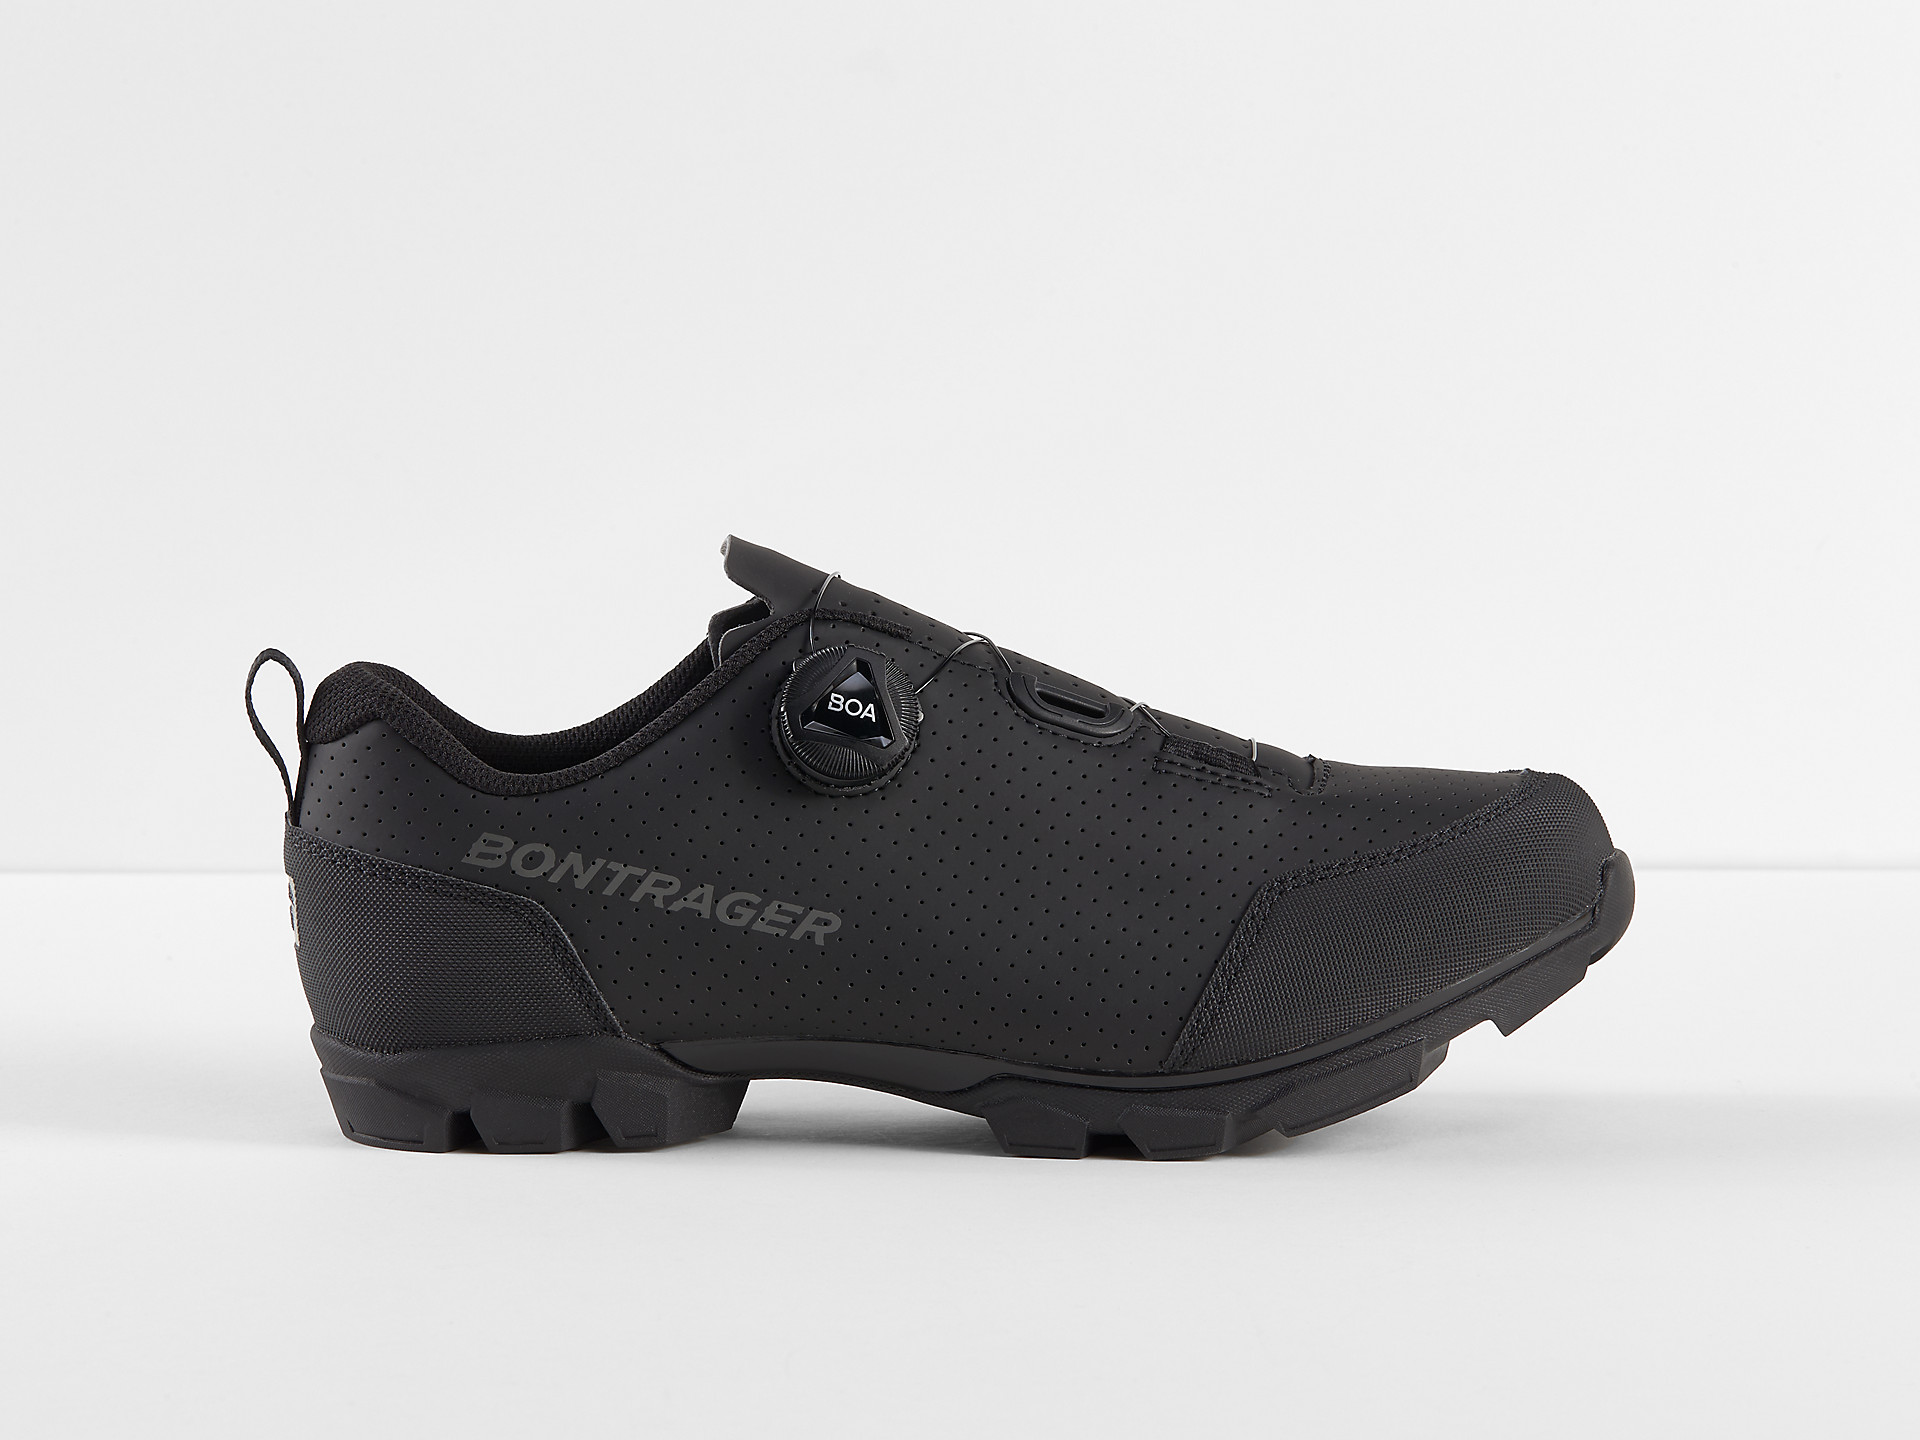 <a href="https://cycles-clement.be/product/chaussure-bont-evoke-38-black/">CHAUSSURE BONT EVOKE 38 BLACK</a>